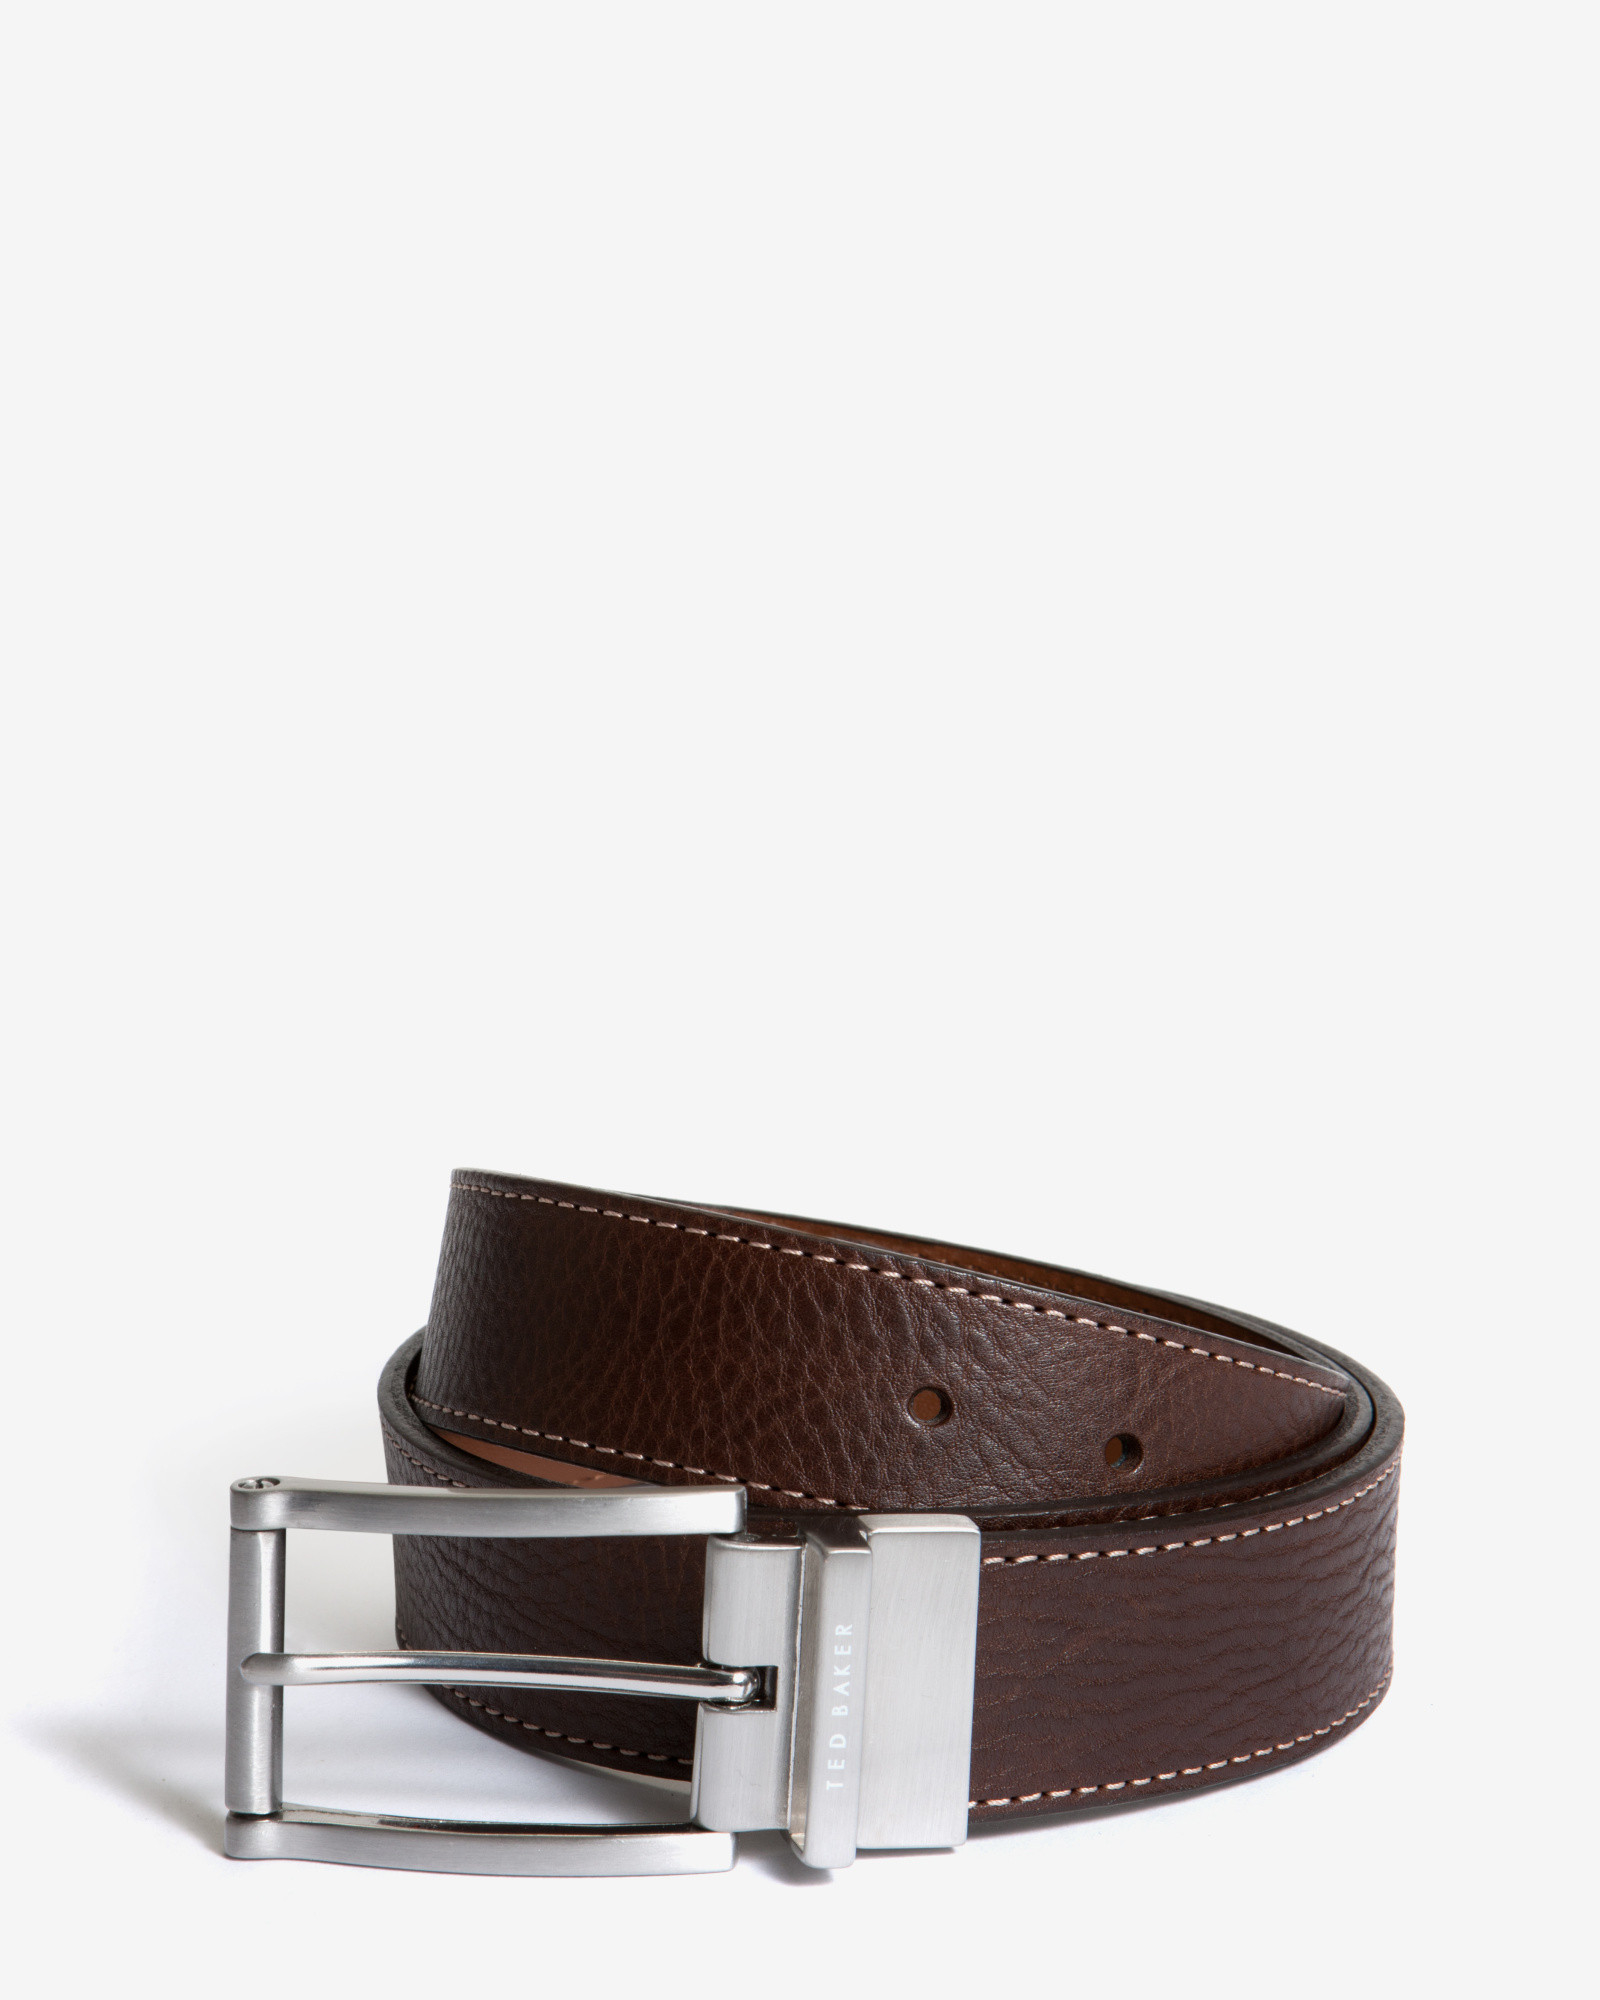 Ted Baker Reversible Leather Belt in Chocolate (Brown) for Men - Lyst